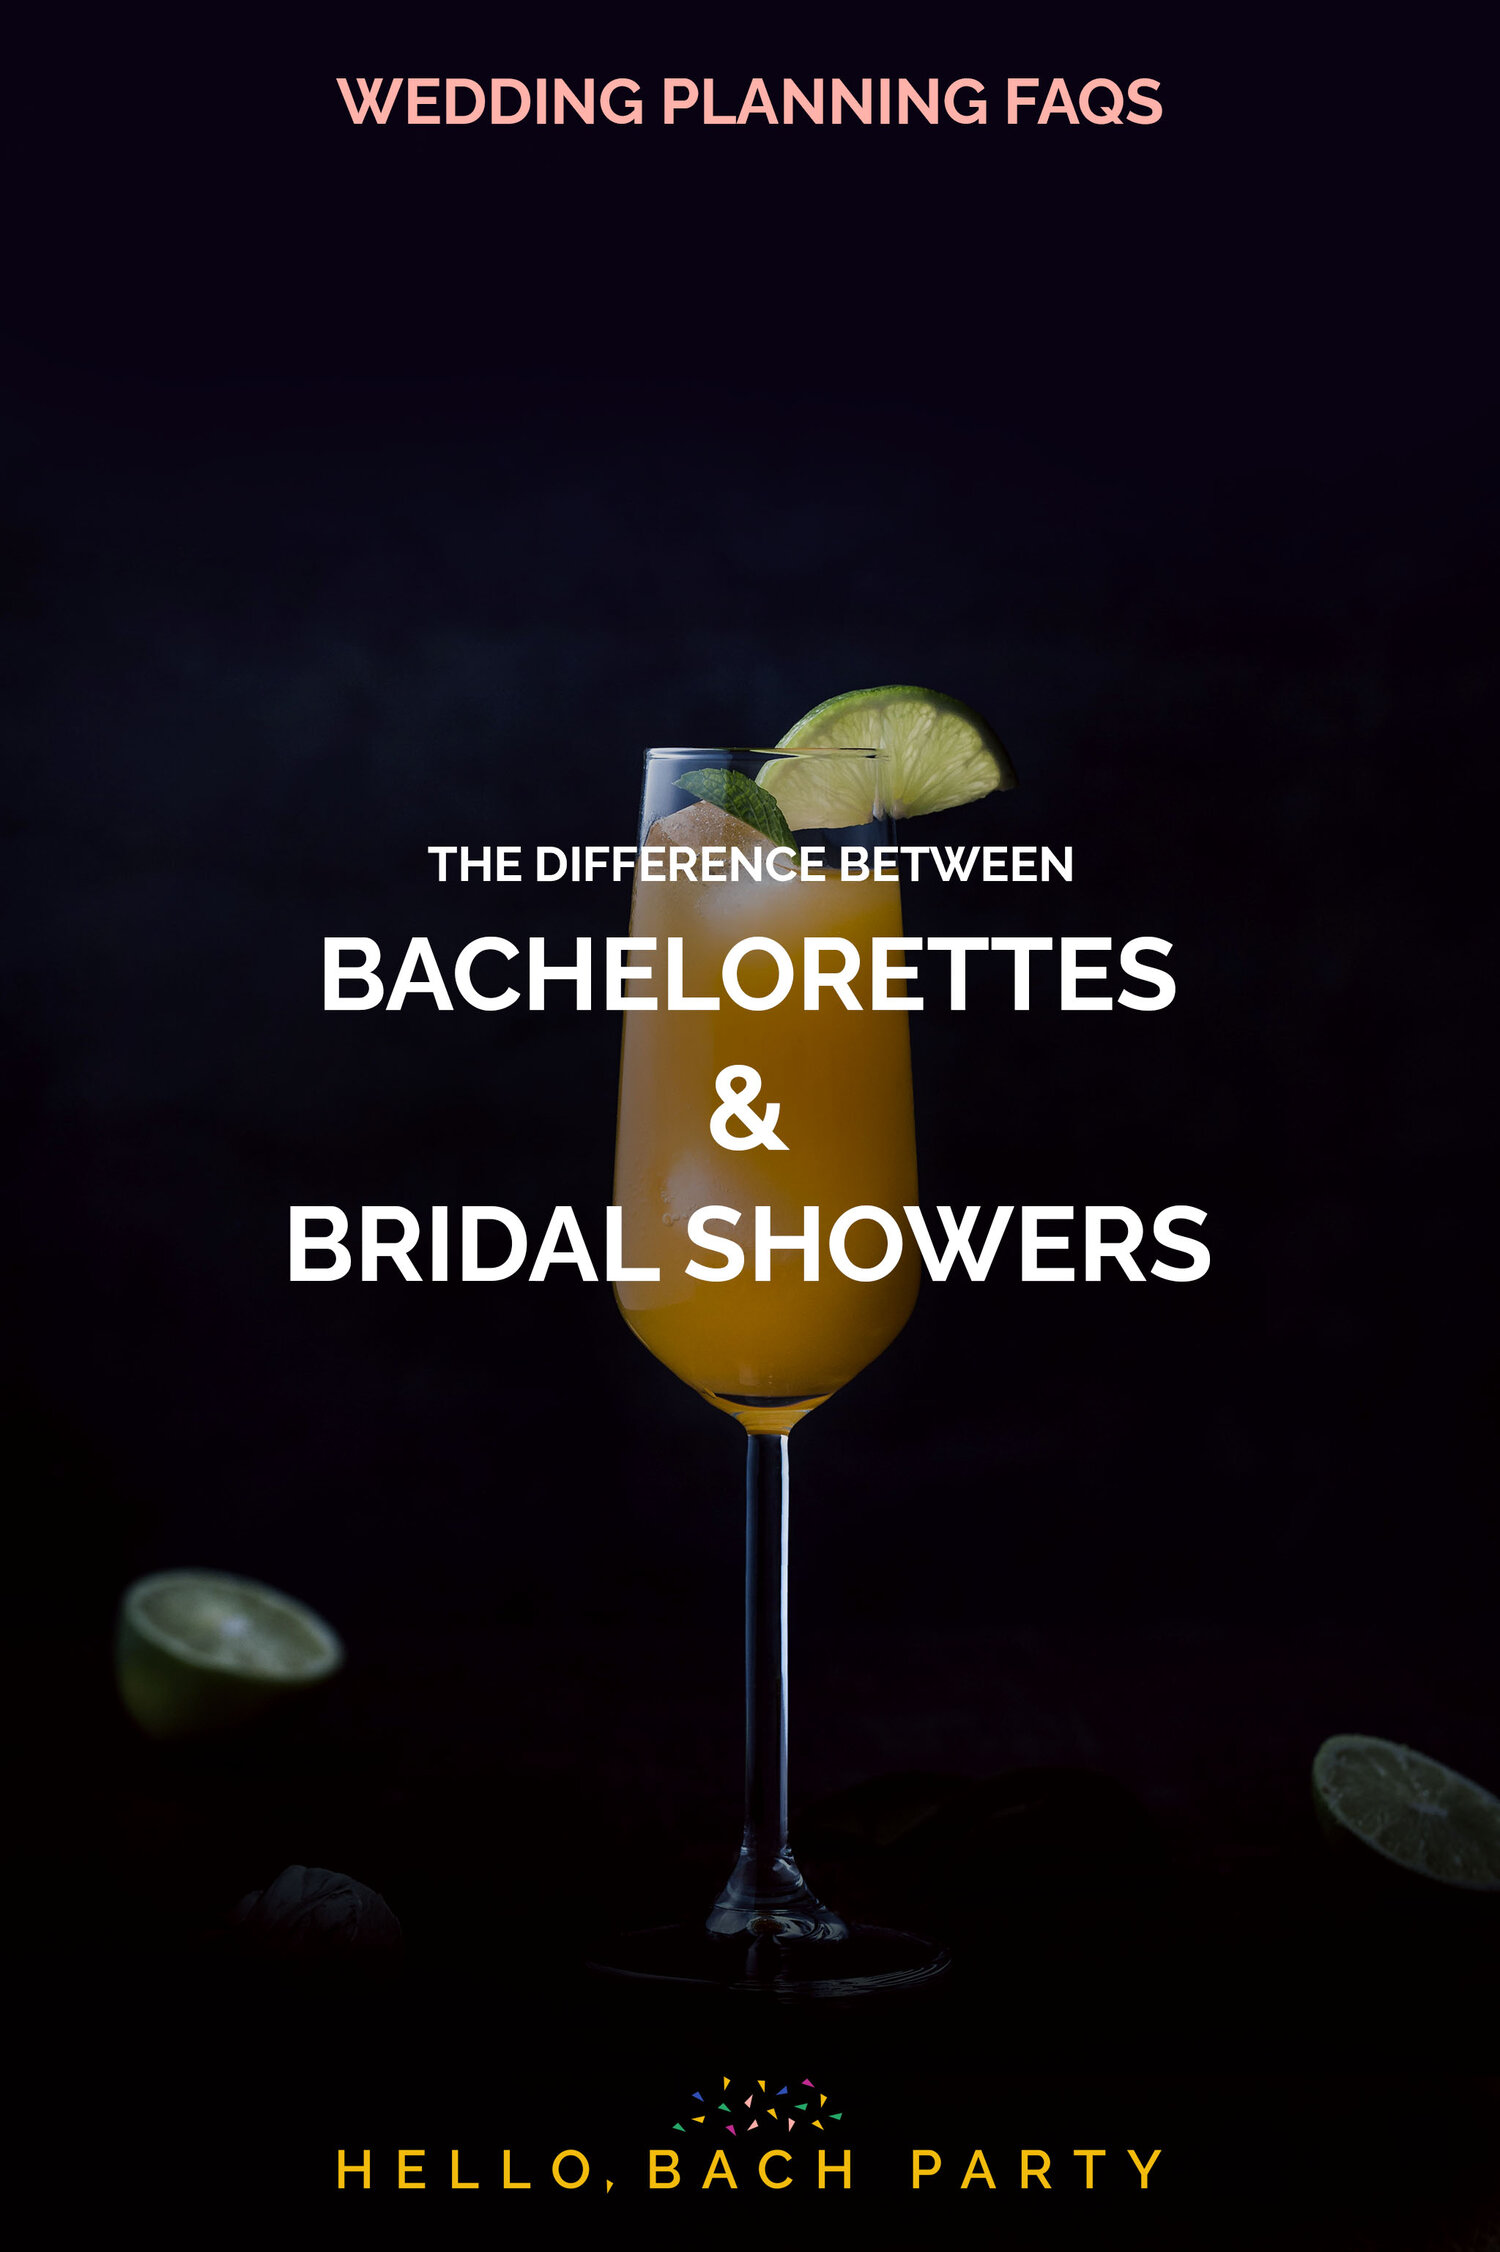 Bridal Shower vs Bachelorette Party: What's the Difference? - Bach Bride